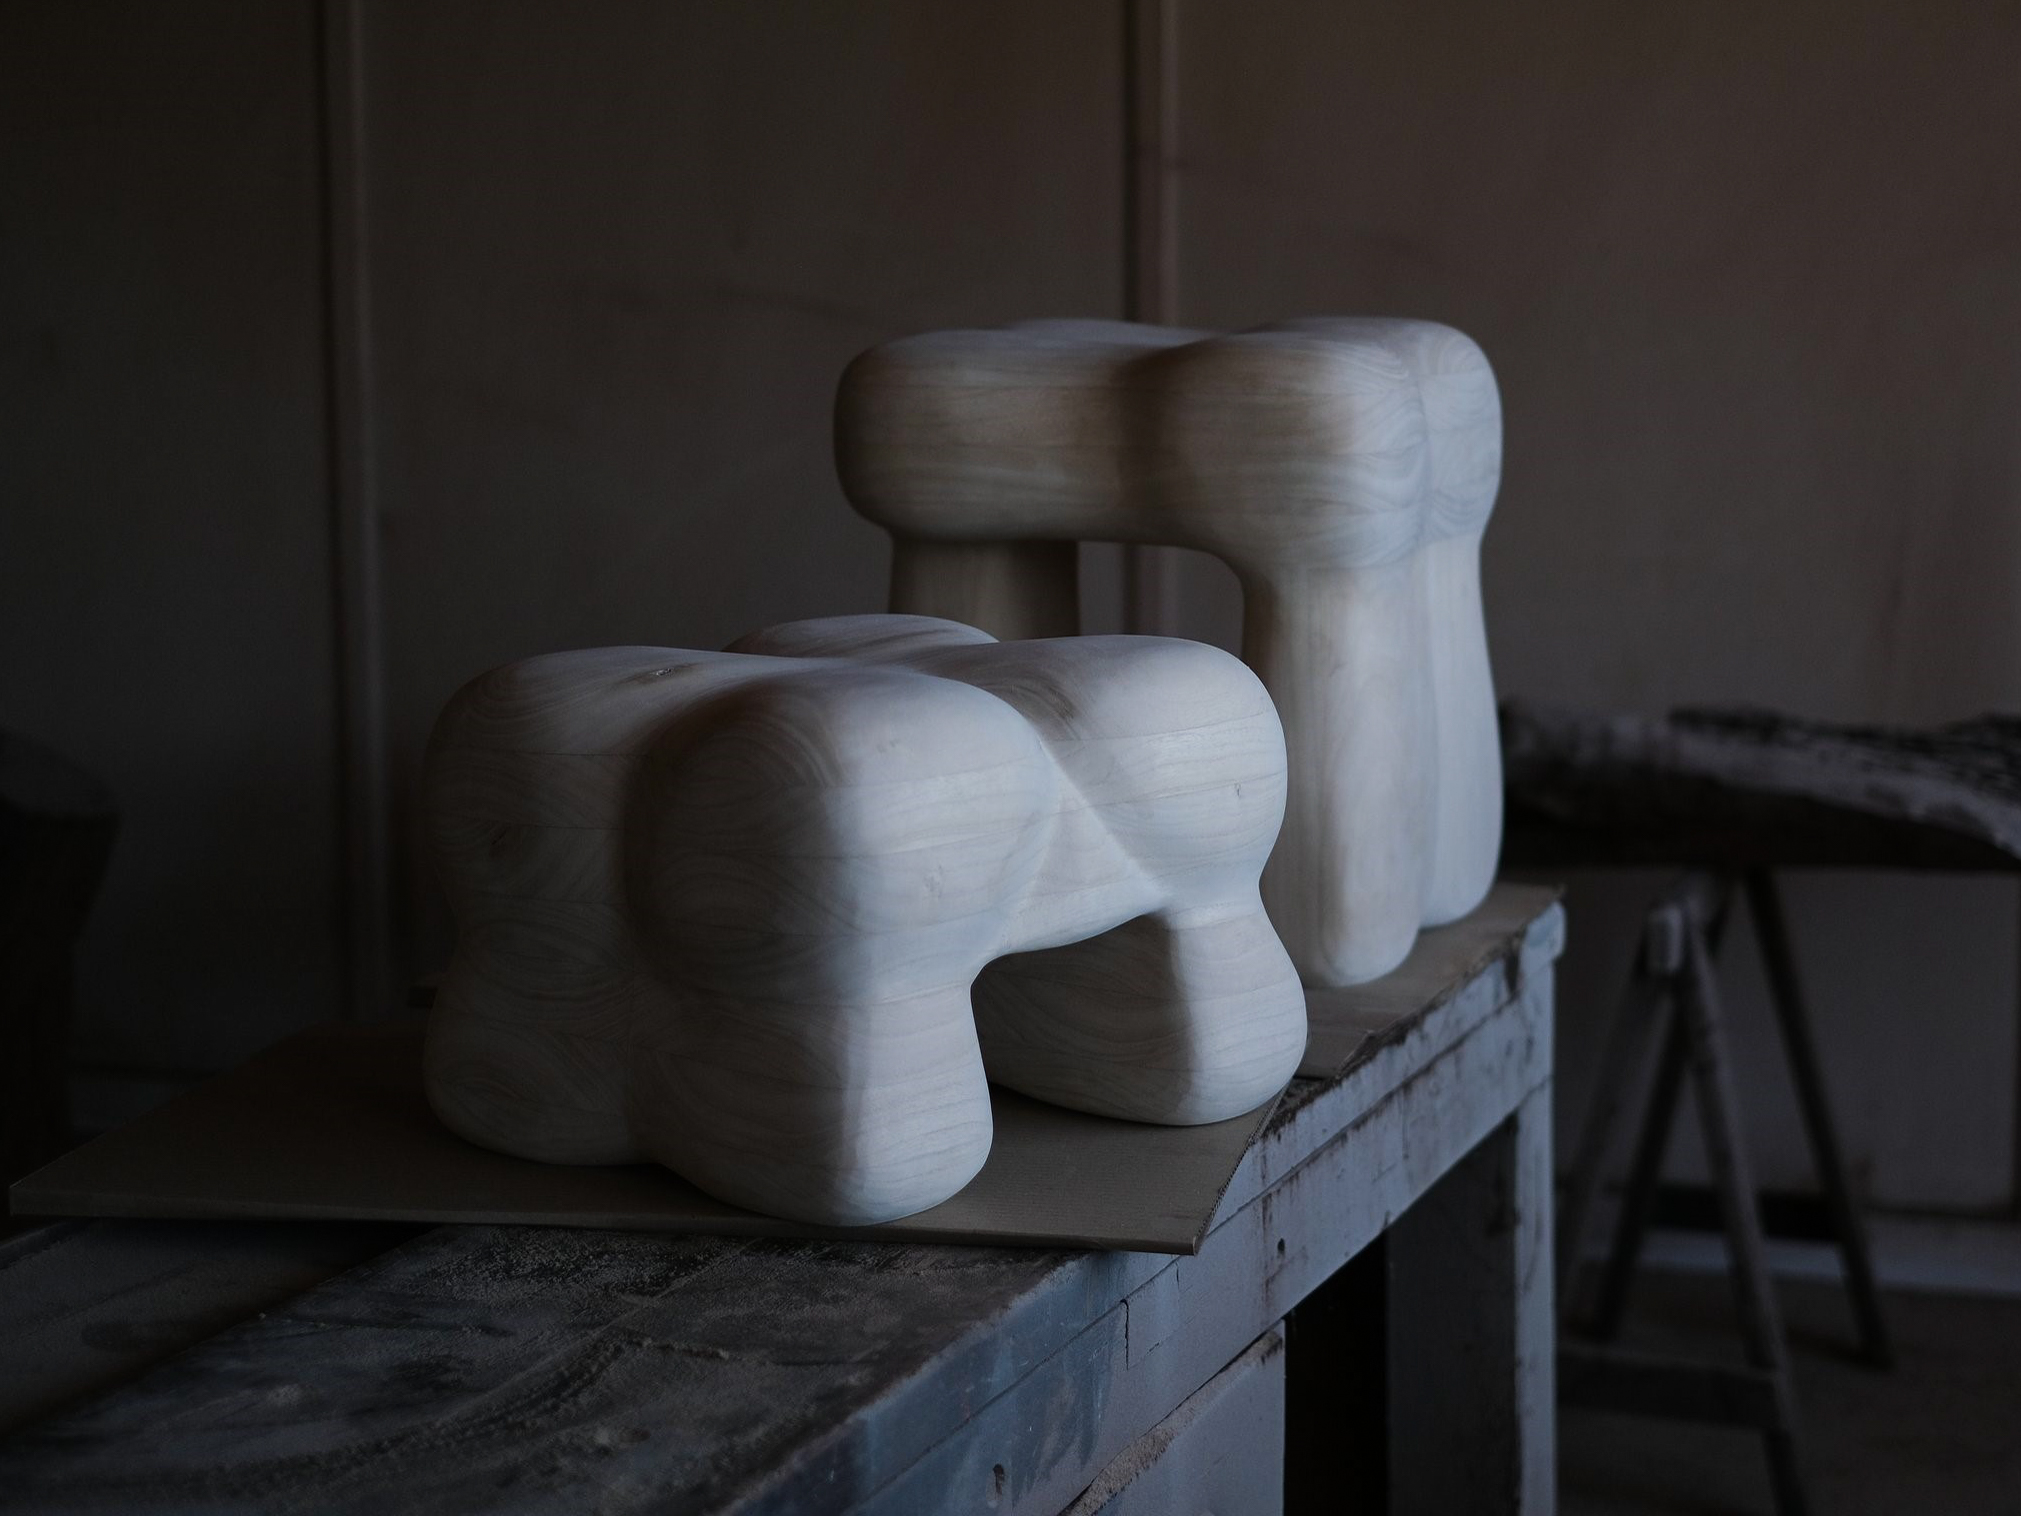 Completed wooden sculptures, in light coloured wood, that are light seats with 4 legs, and kind of look like butts